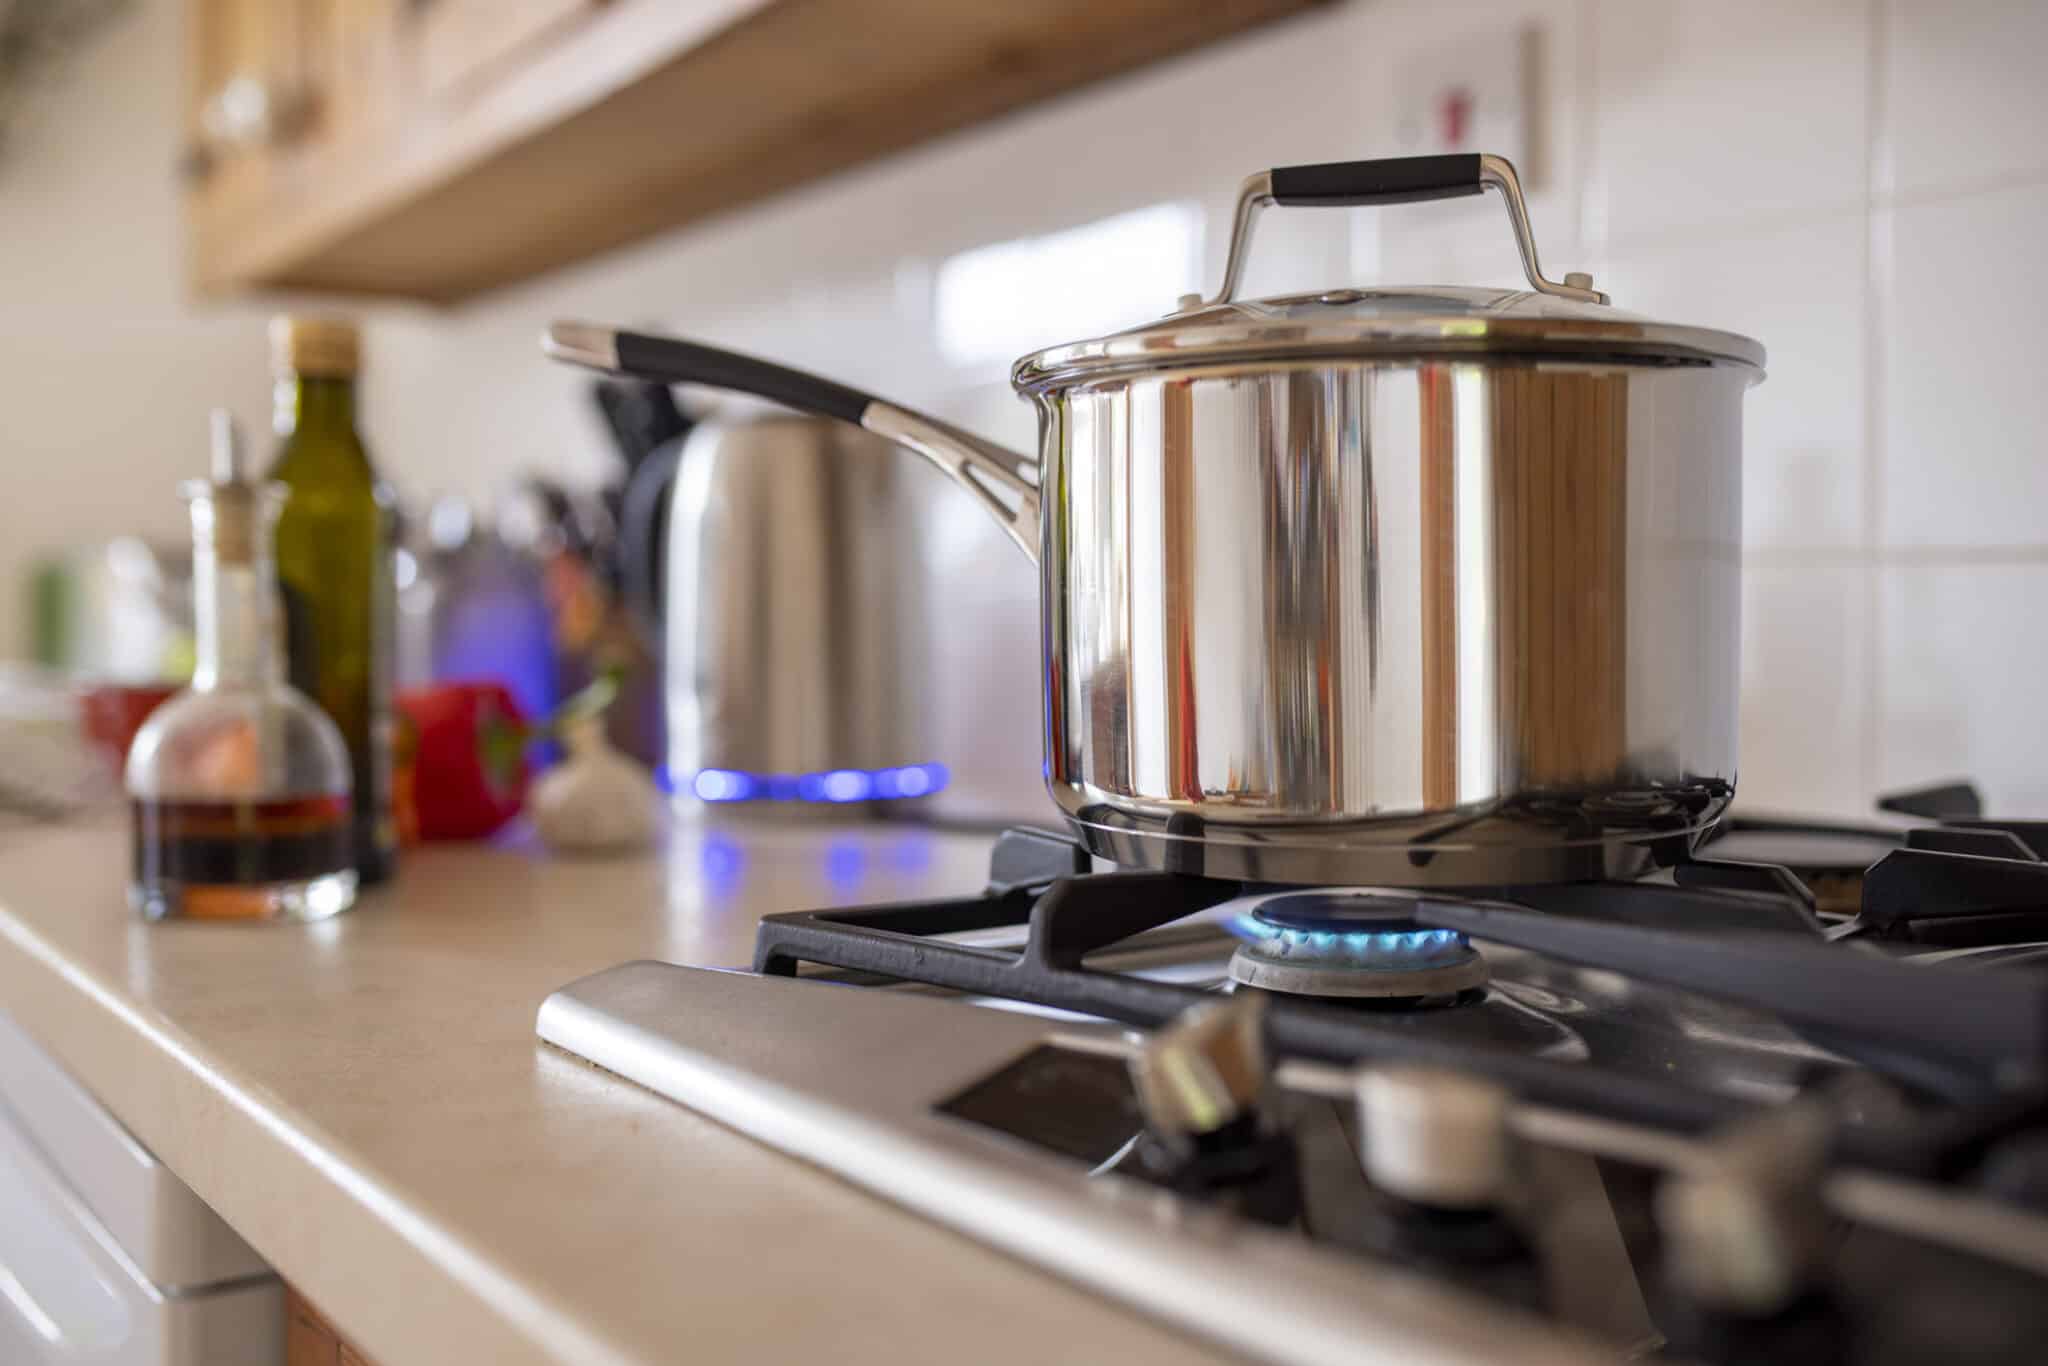 Get Cooking! The Best Cookware for Seniors